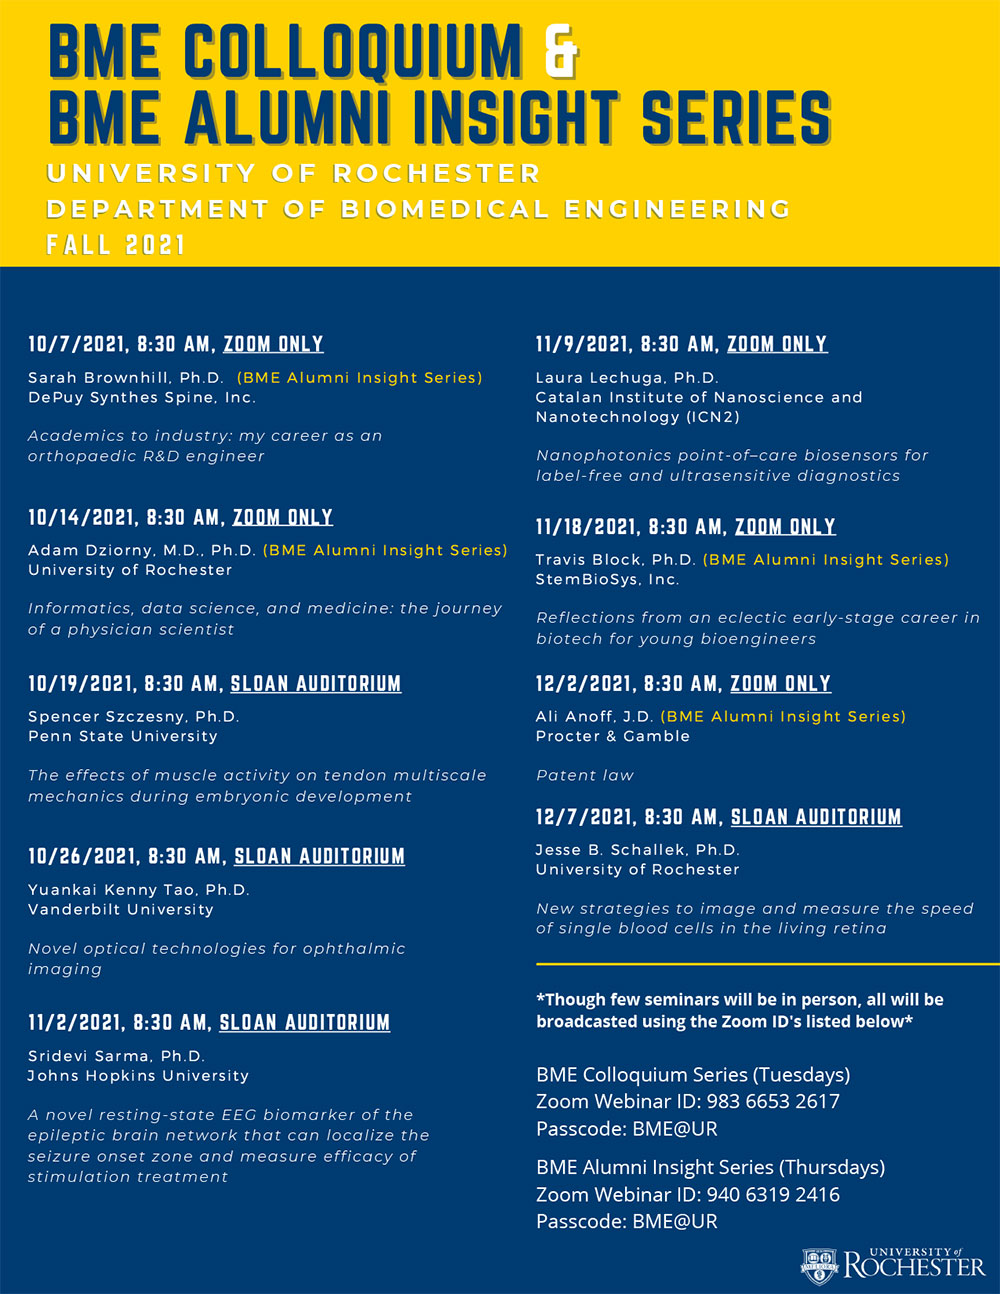 The poster for the seminar series.